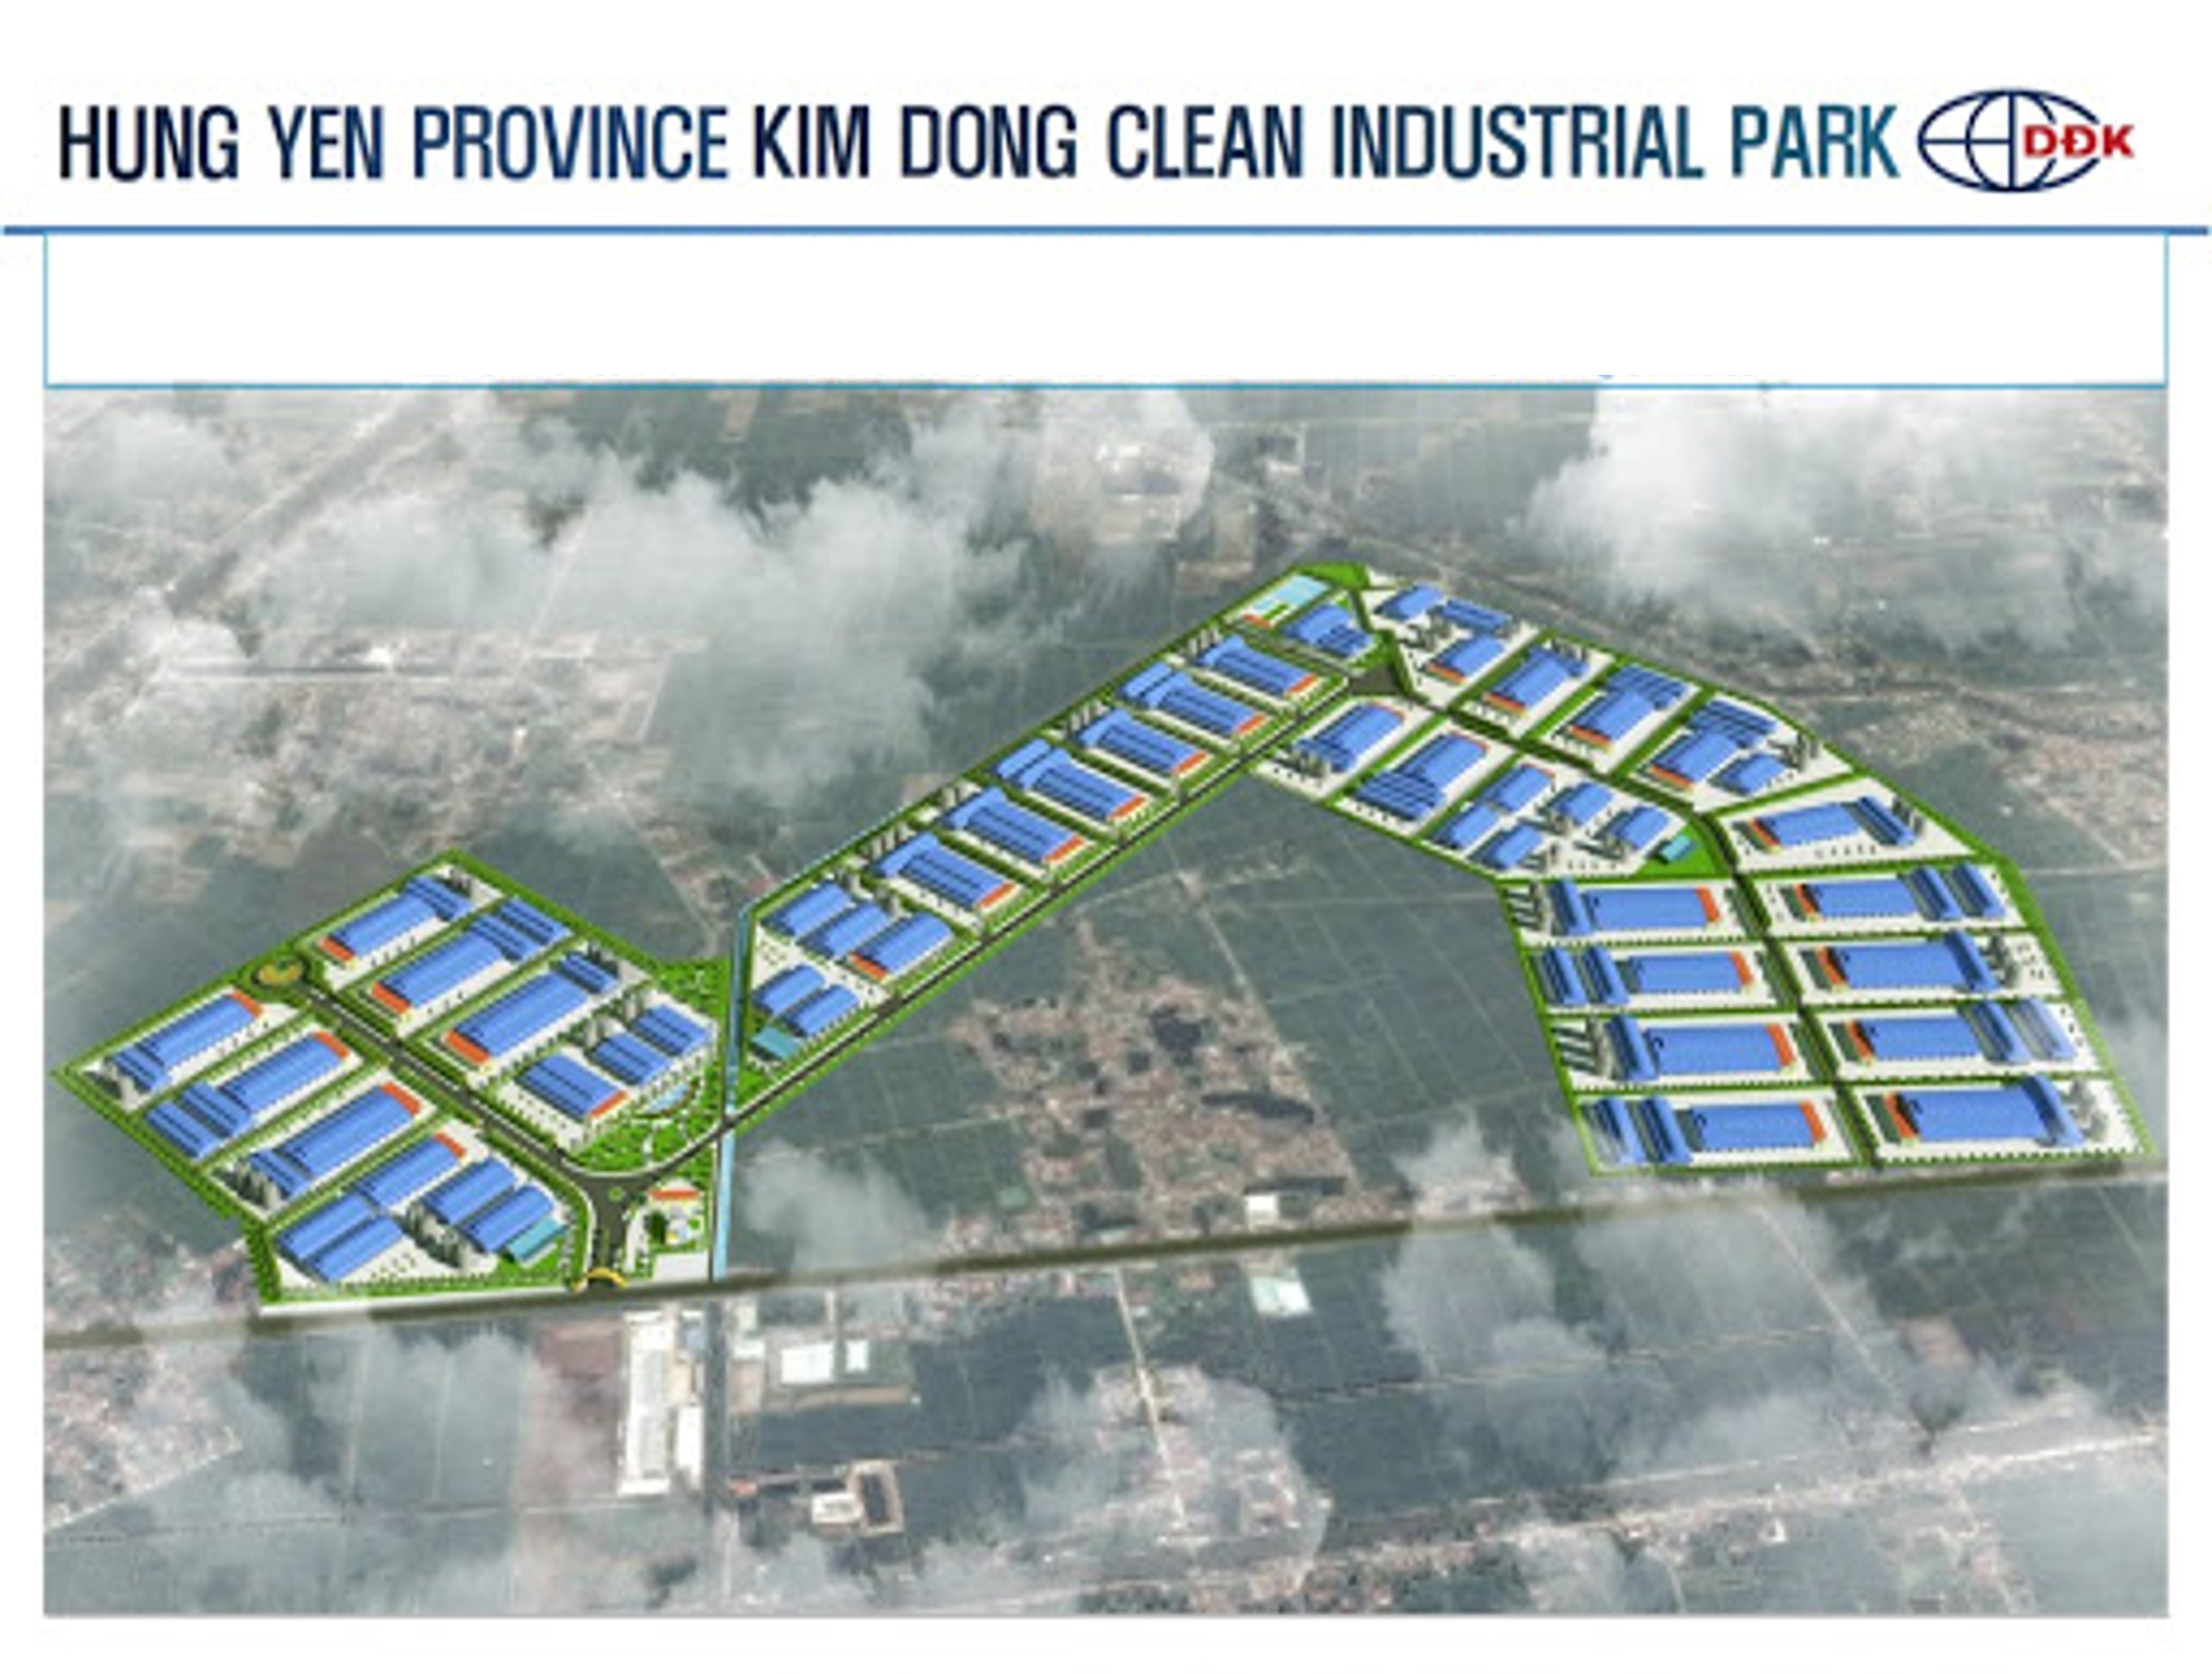 Kim Dong Industrial Park